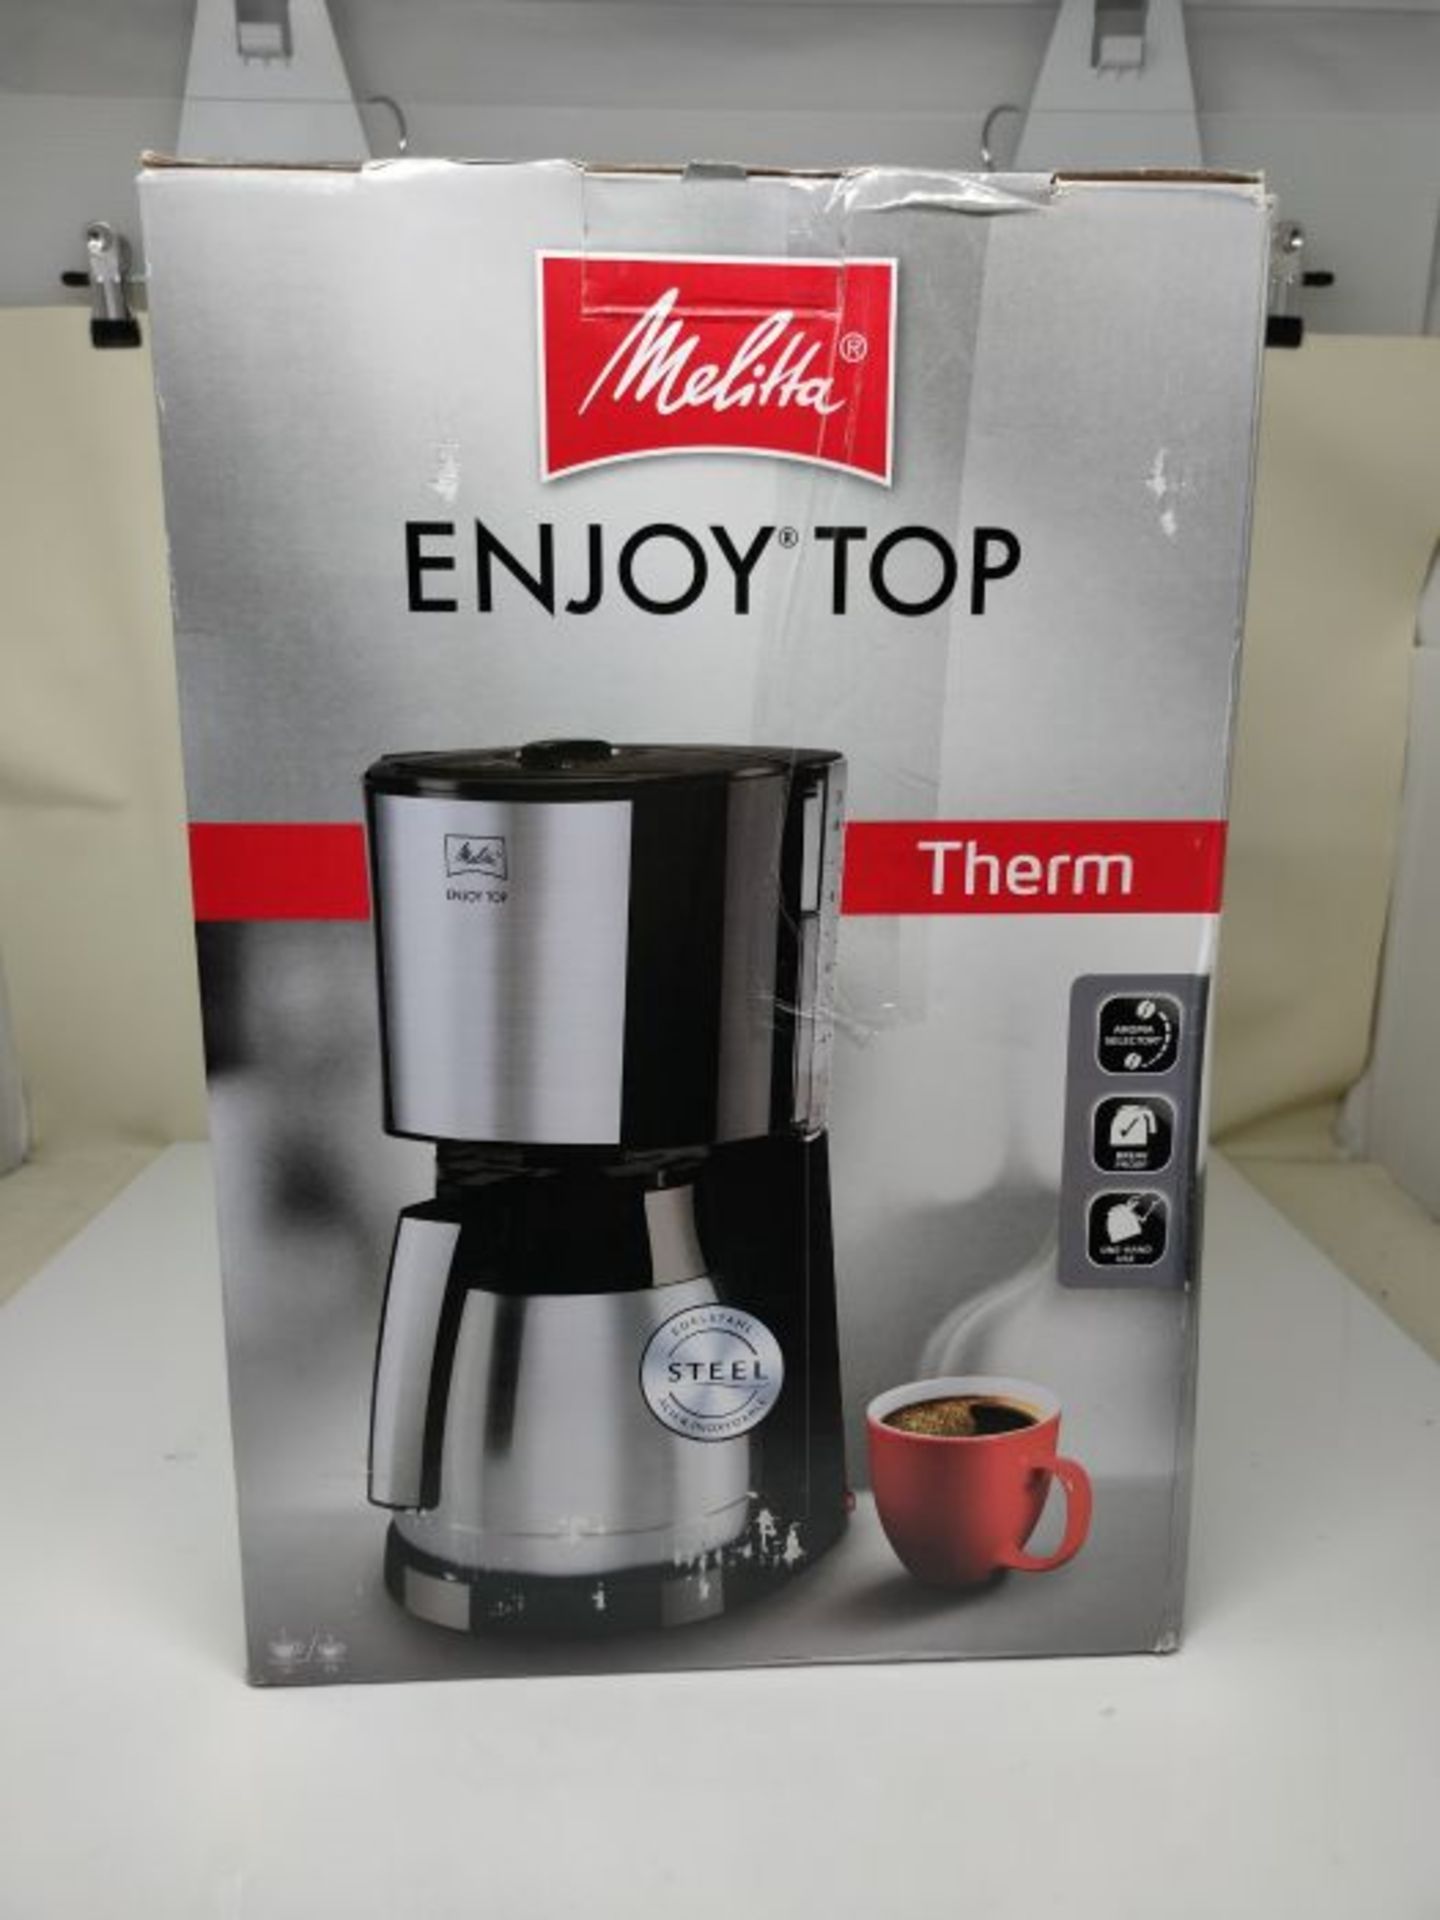 Melitta Enjoy Top Therm, 1017-08, Coffee Machine with Insulated Stainless Steel Jug, A - Image 2 of 3